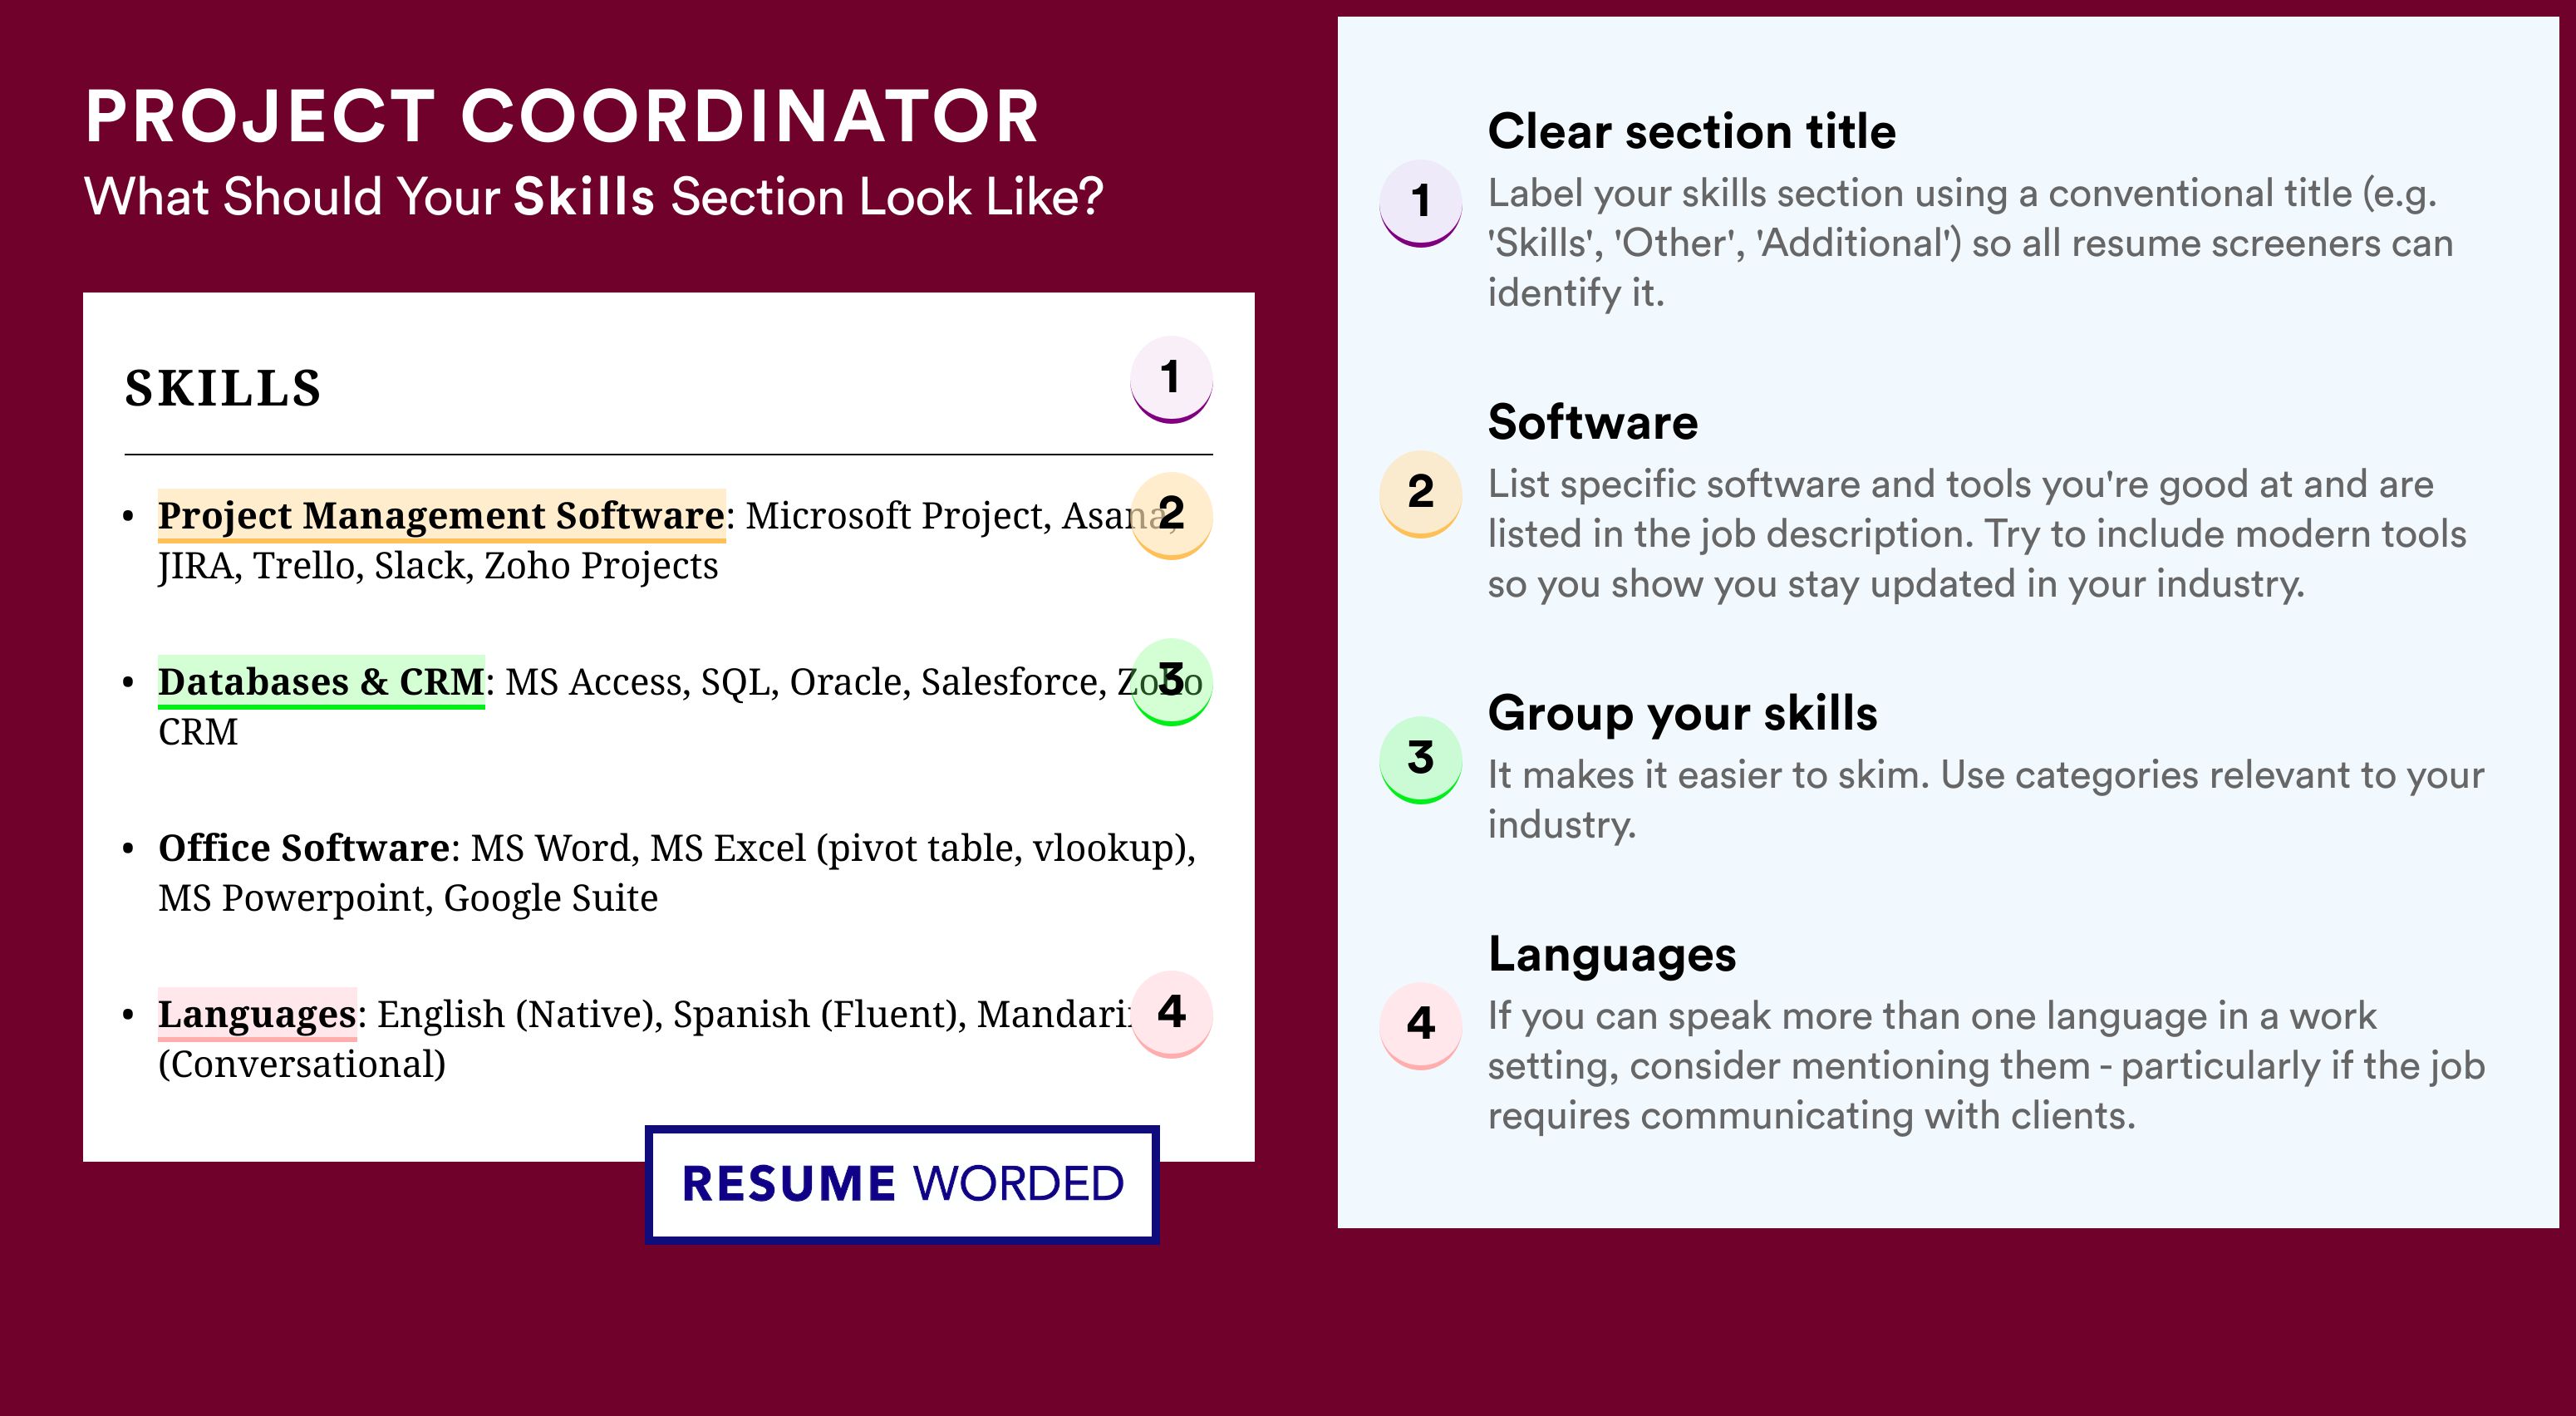 How To Write Your Skills Section - Project Coordinator Roles